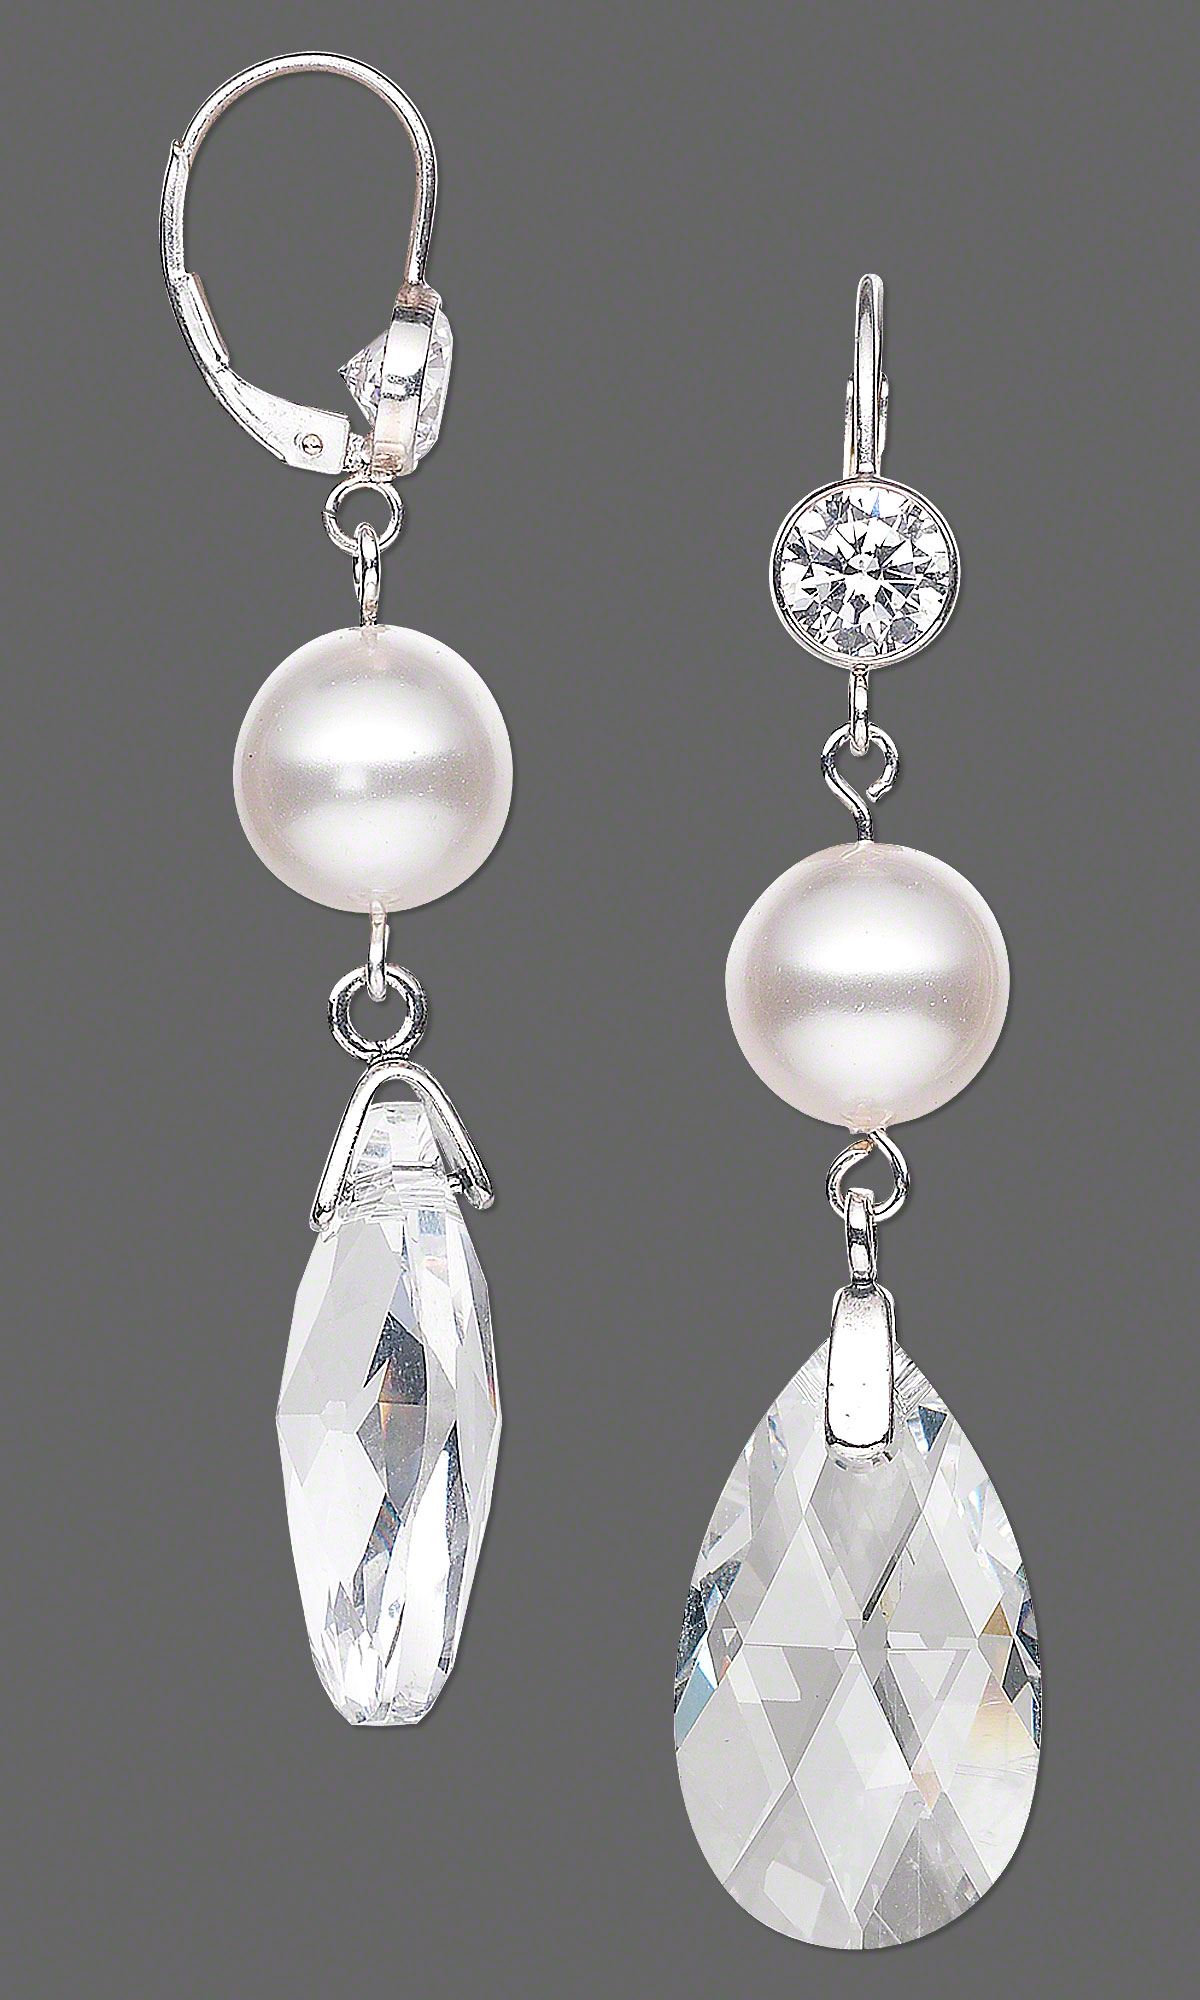 Jewelry Design - Earrings with Swarovski Crystal Pearls and Drops ...